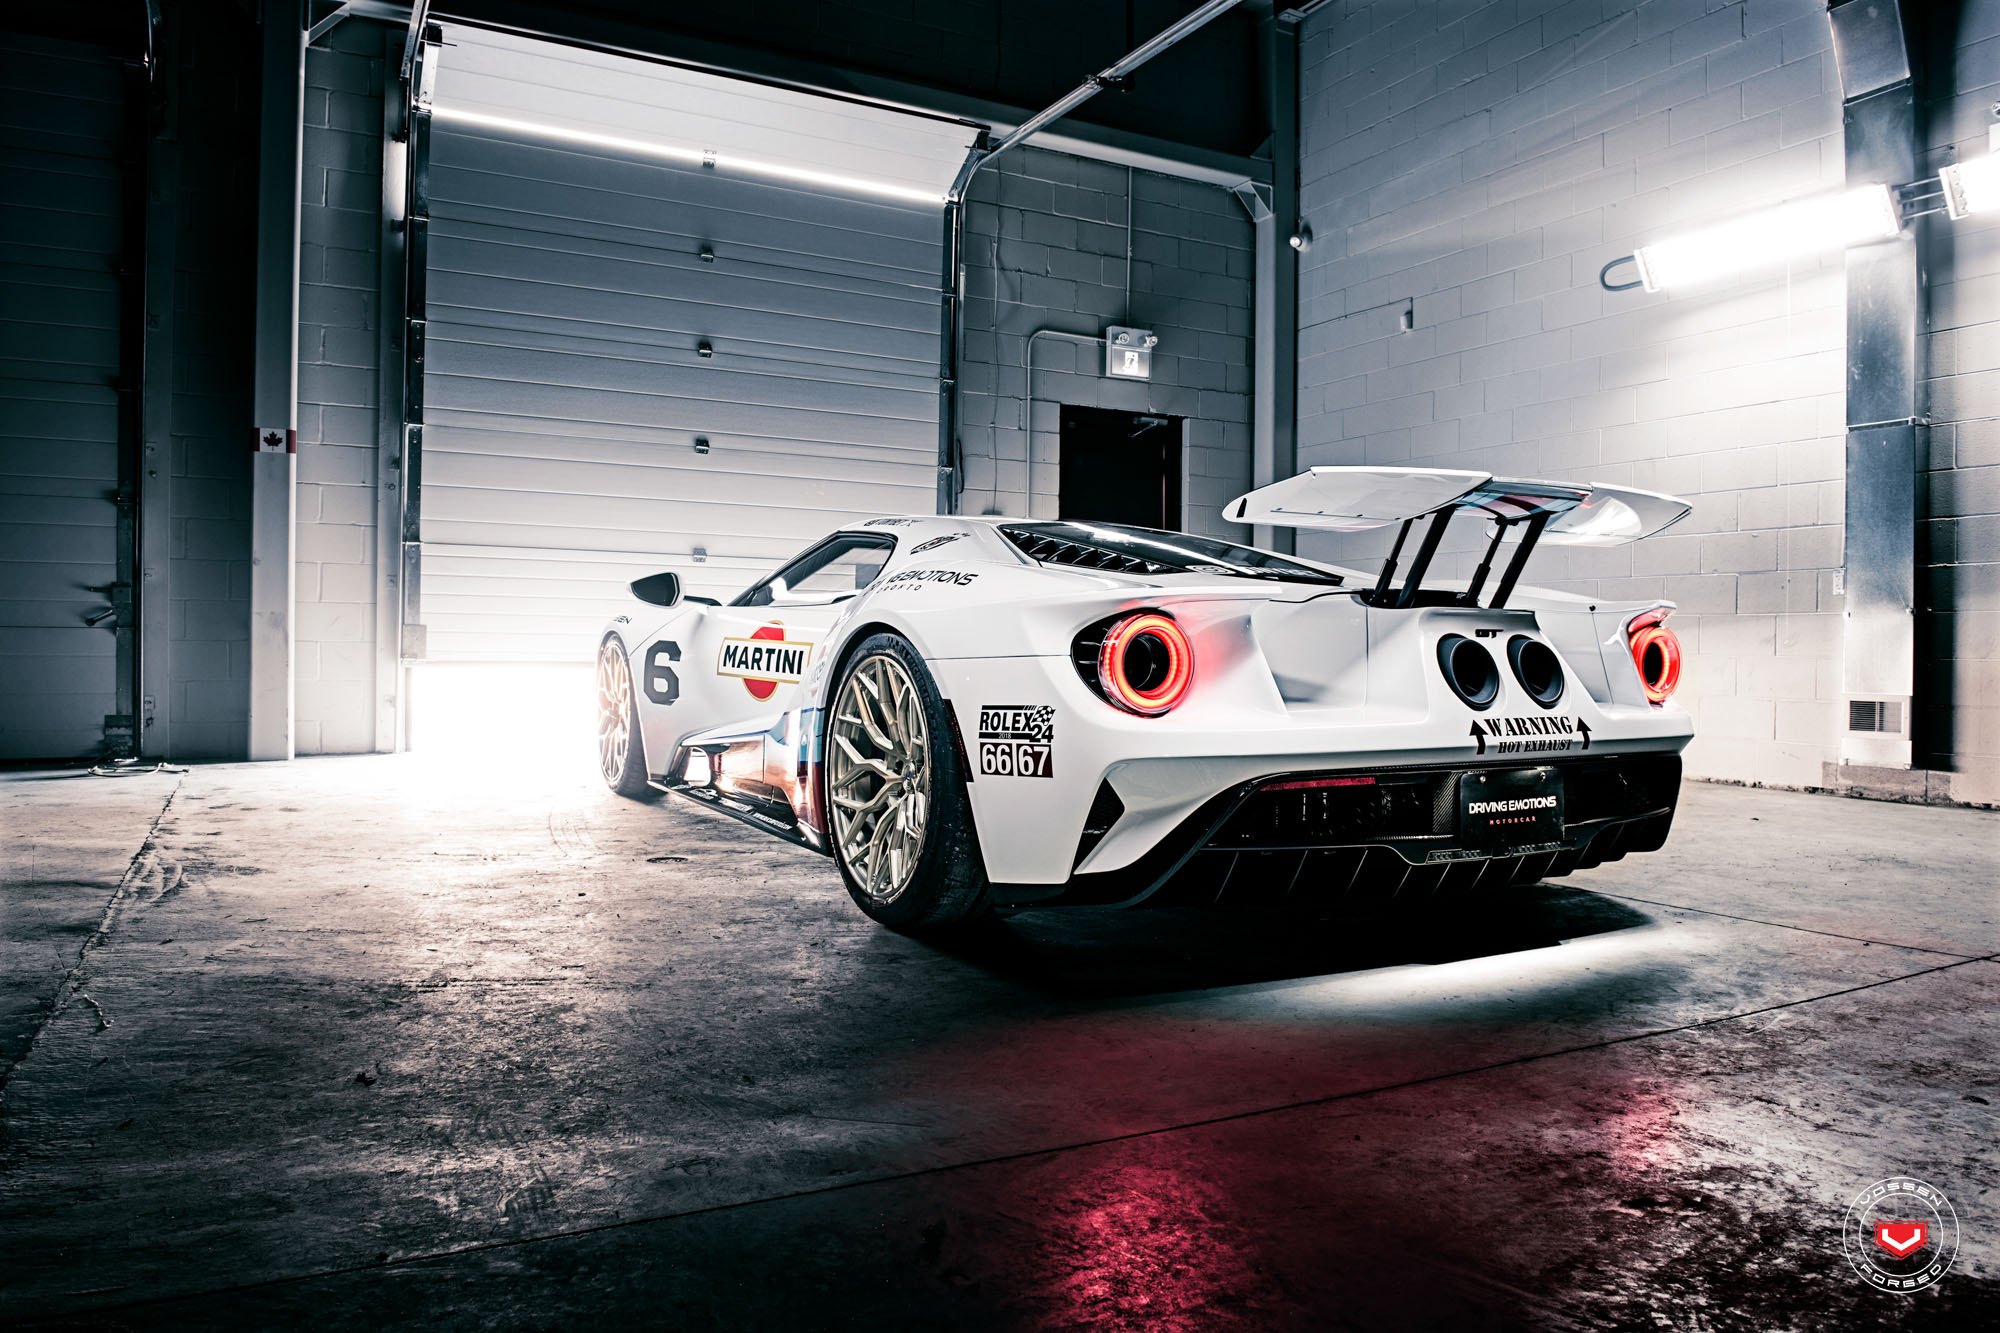 Large Sport Wing Spoiler on White Debadged Ford GT - Photo by Vossen